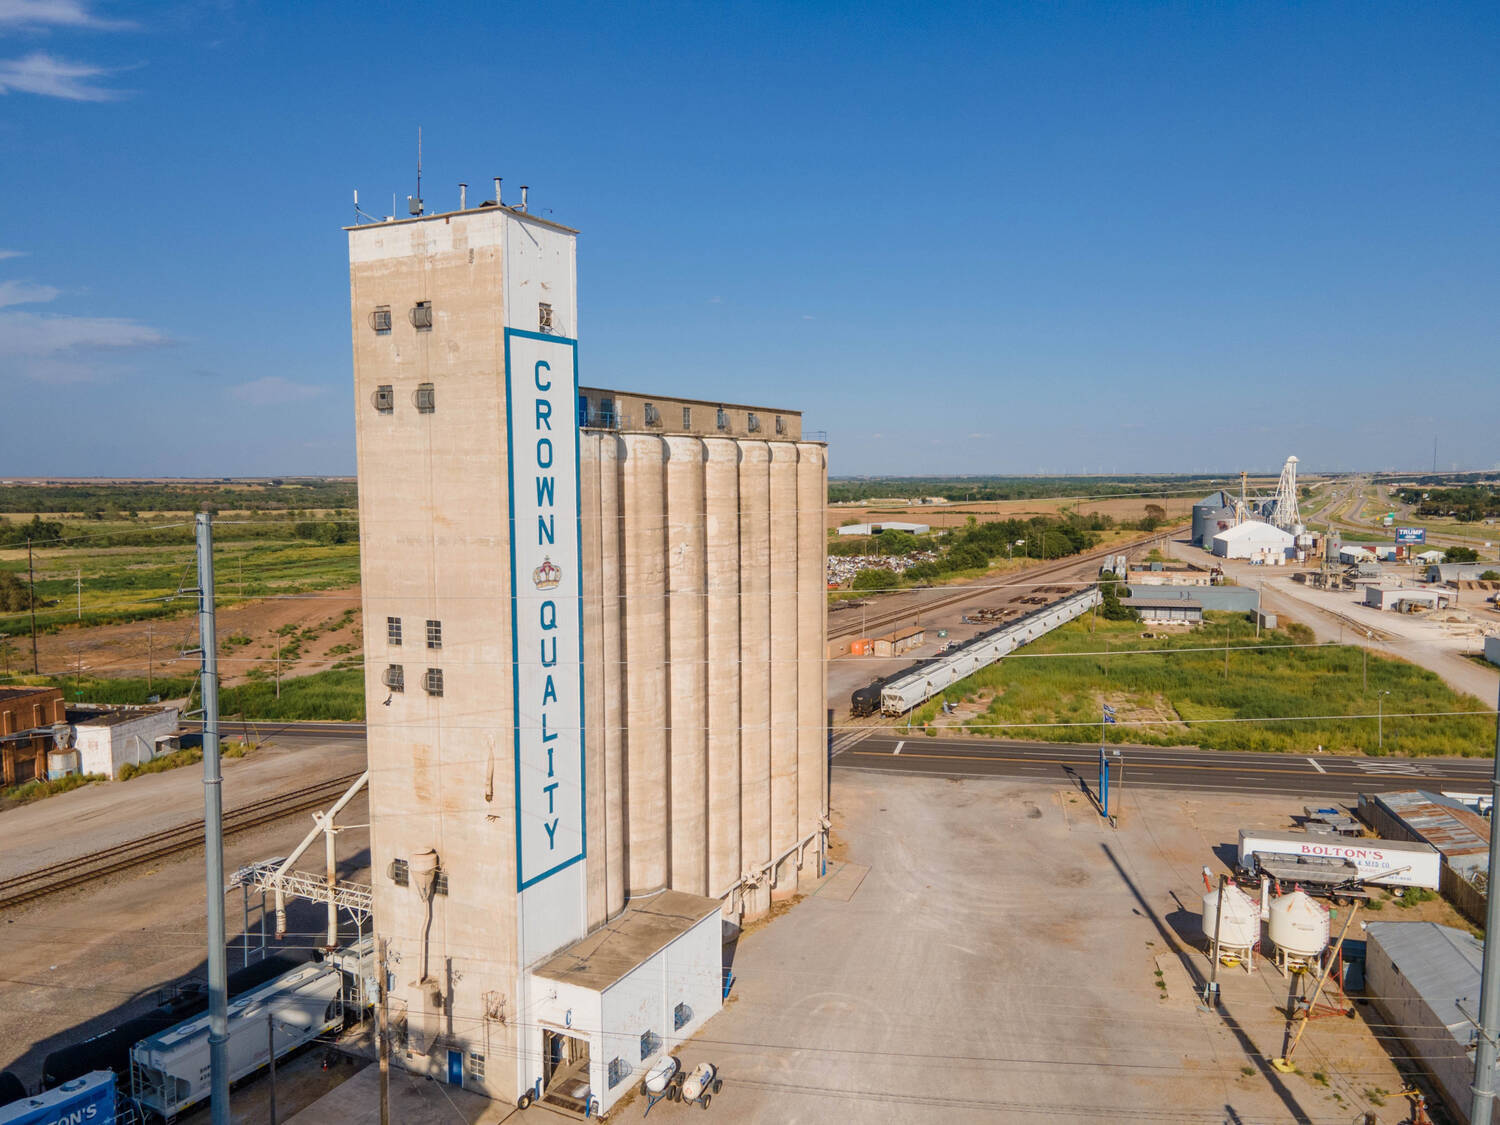 Boltons-Crown-Quality-Feed-Grain-Elevator-Vernon-TX-Wilbarger-County-Republic-Ranches-Bryan-Pickens-14-of-25